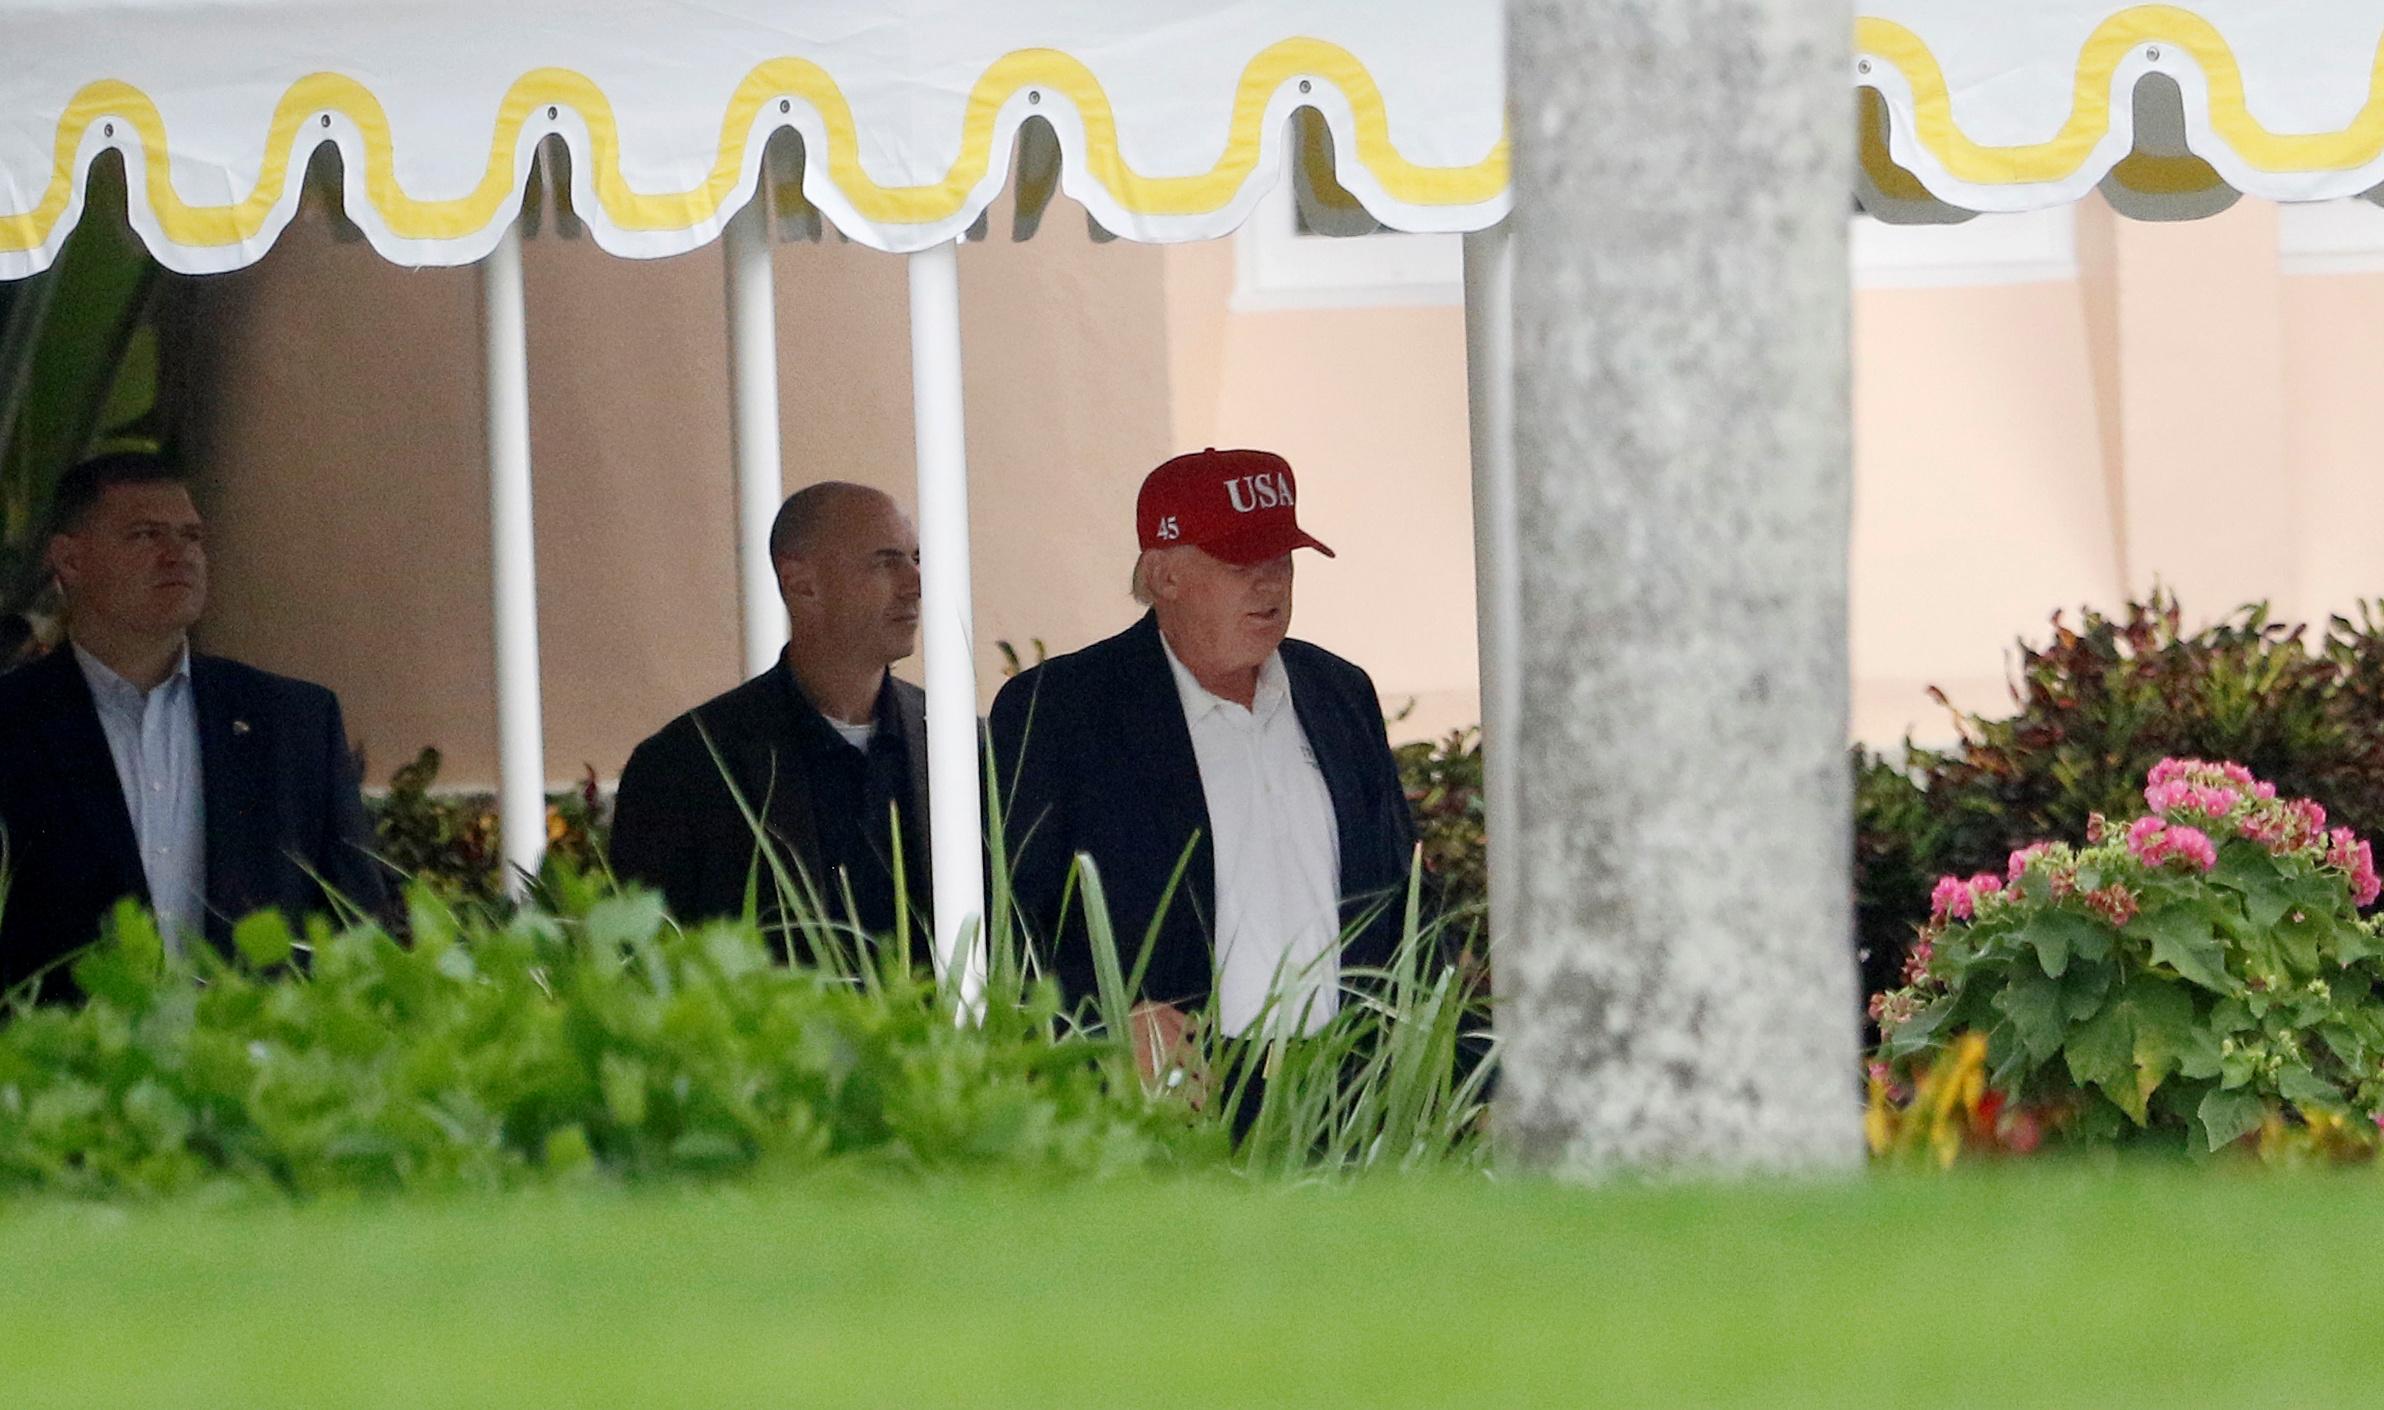 Mr Trump leaving his Mar-a-Lago resort in the new hat